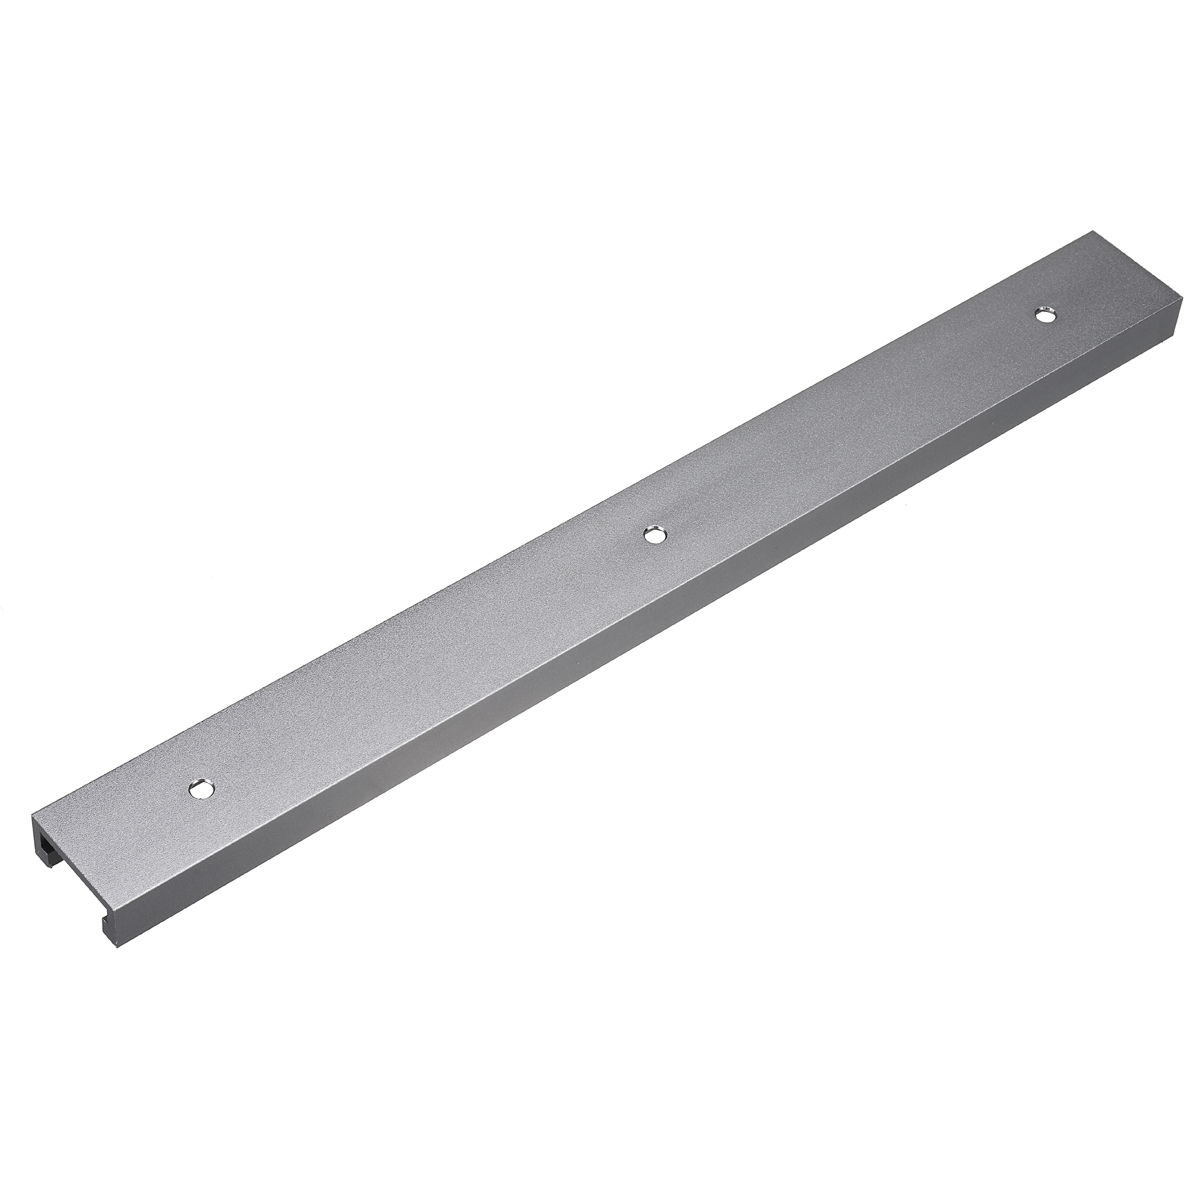 300mm-to-1220mm-Grey-T-Track-with-Predrilled-Mounting-Holes-30mm-x-128mm-Miter-Slot-for-Saw-Router-T-1810952-3